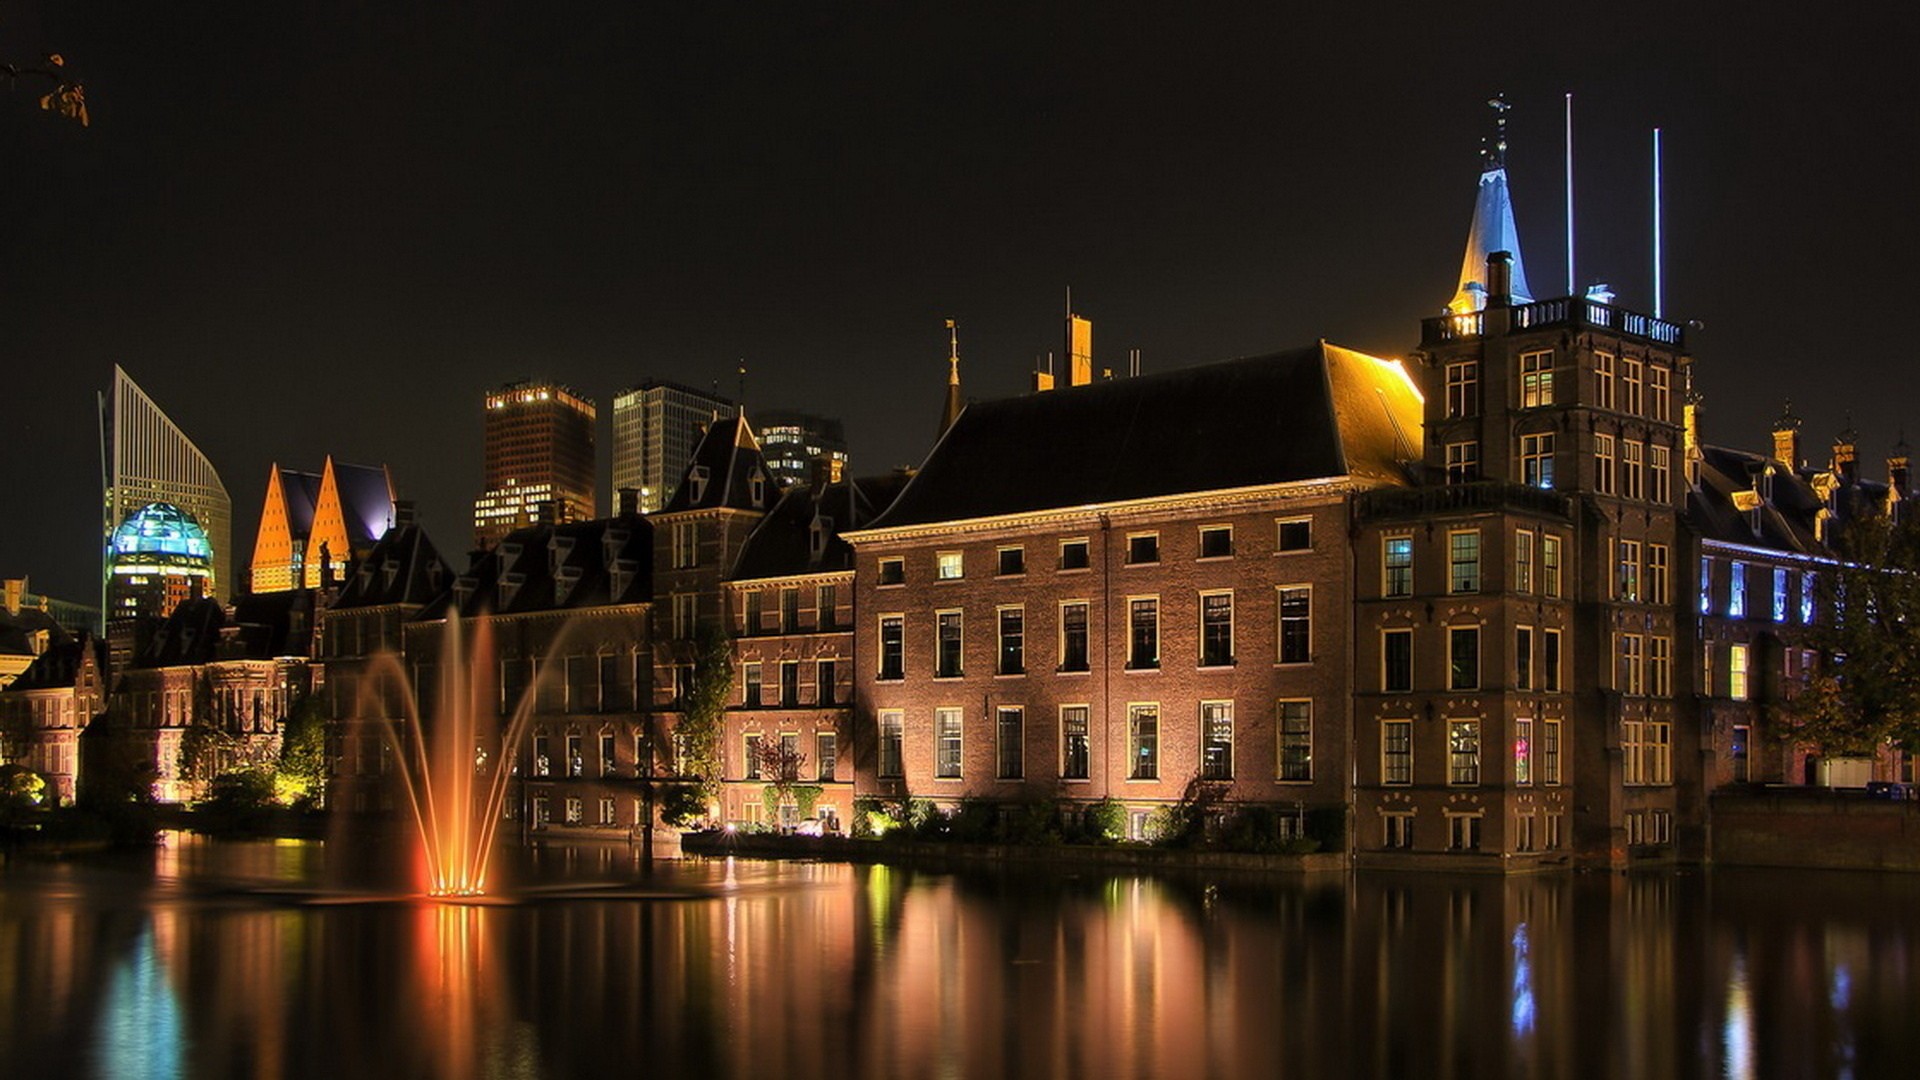 General 1920x1080 architecture building water reflection long exposure night lights old building fountain modern window